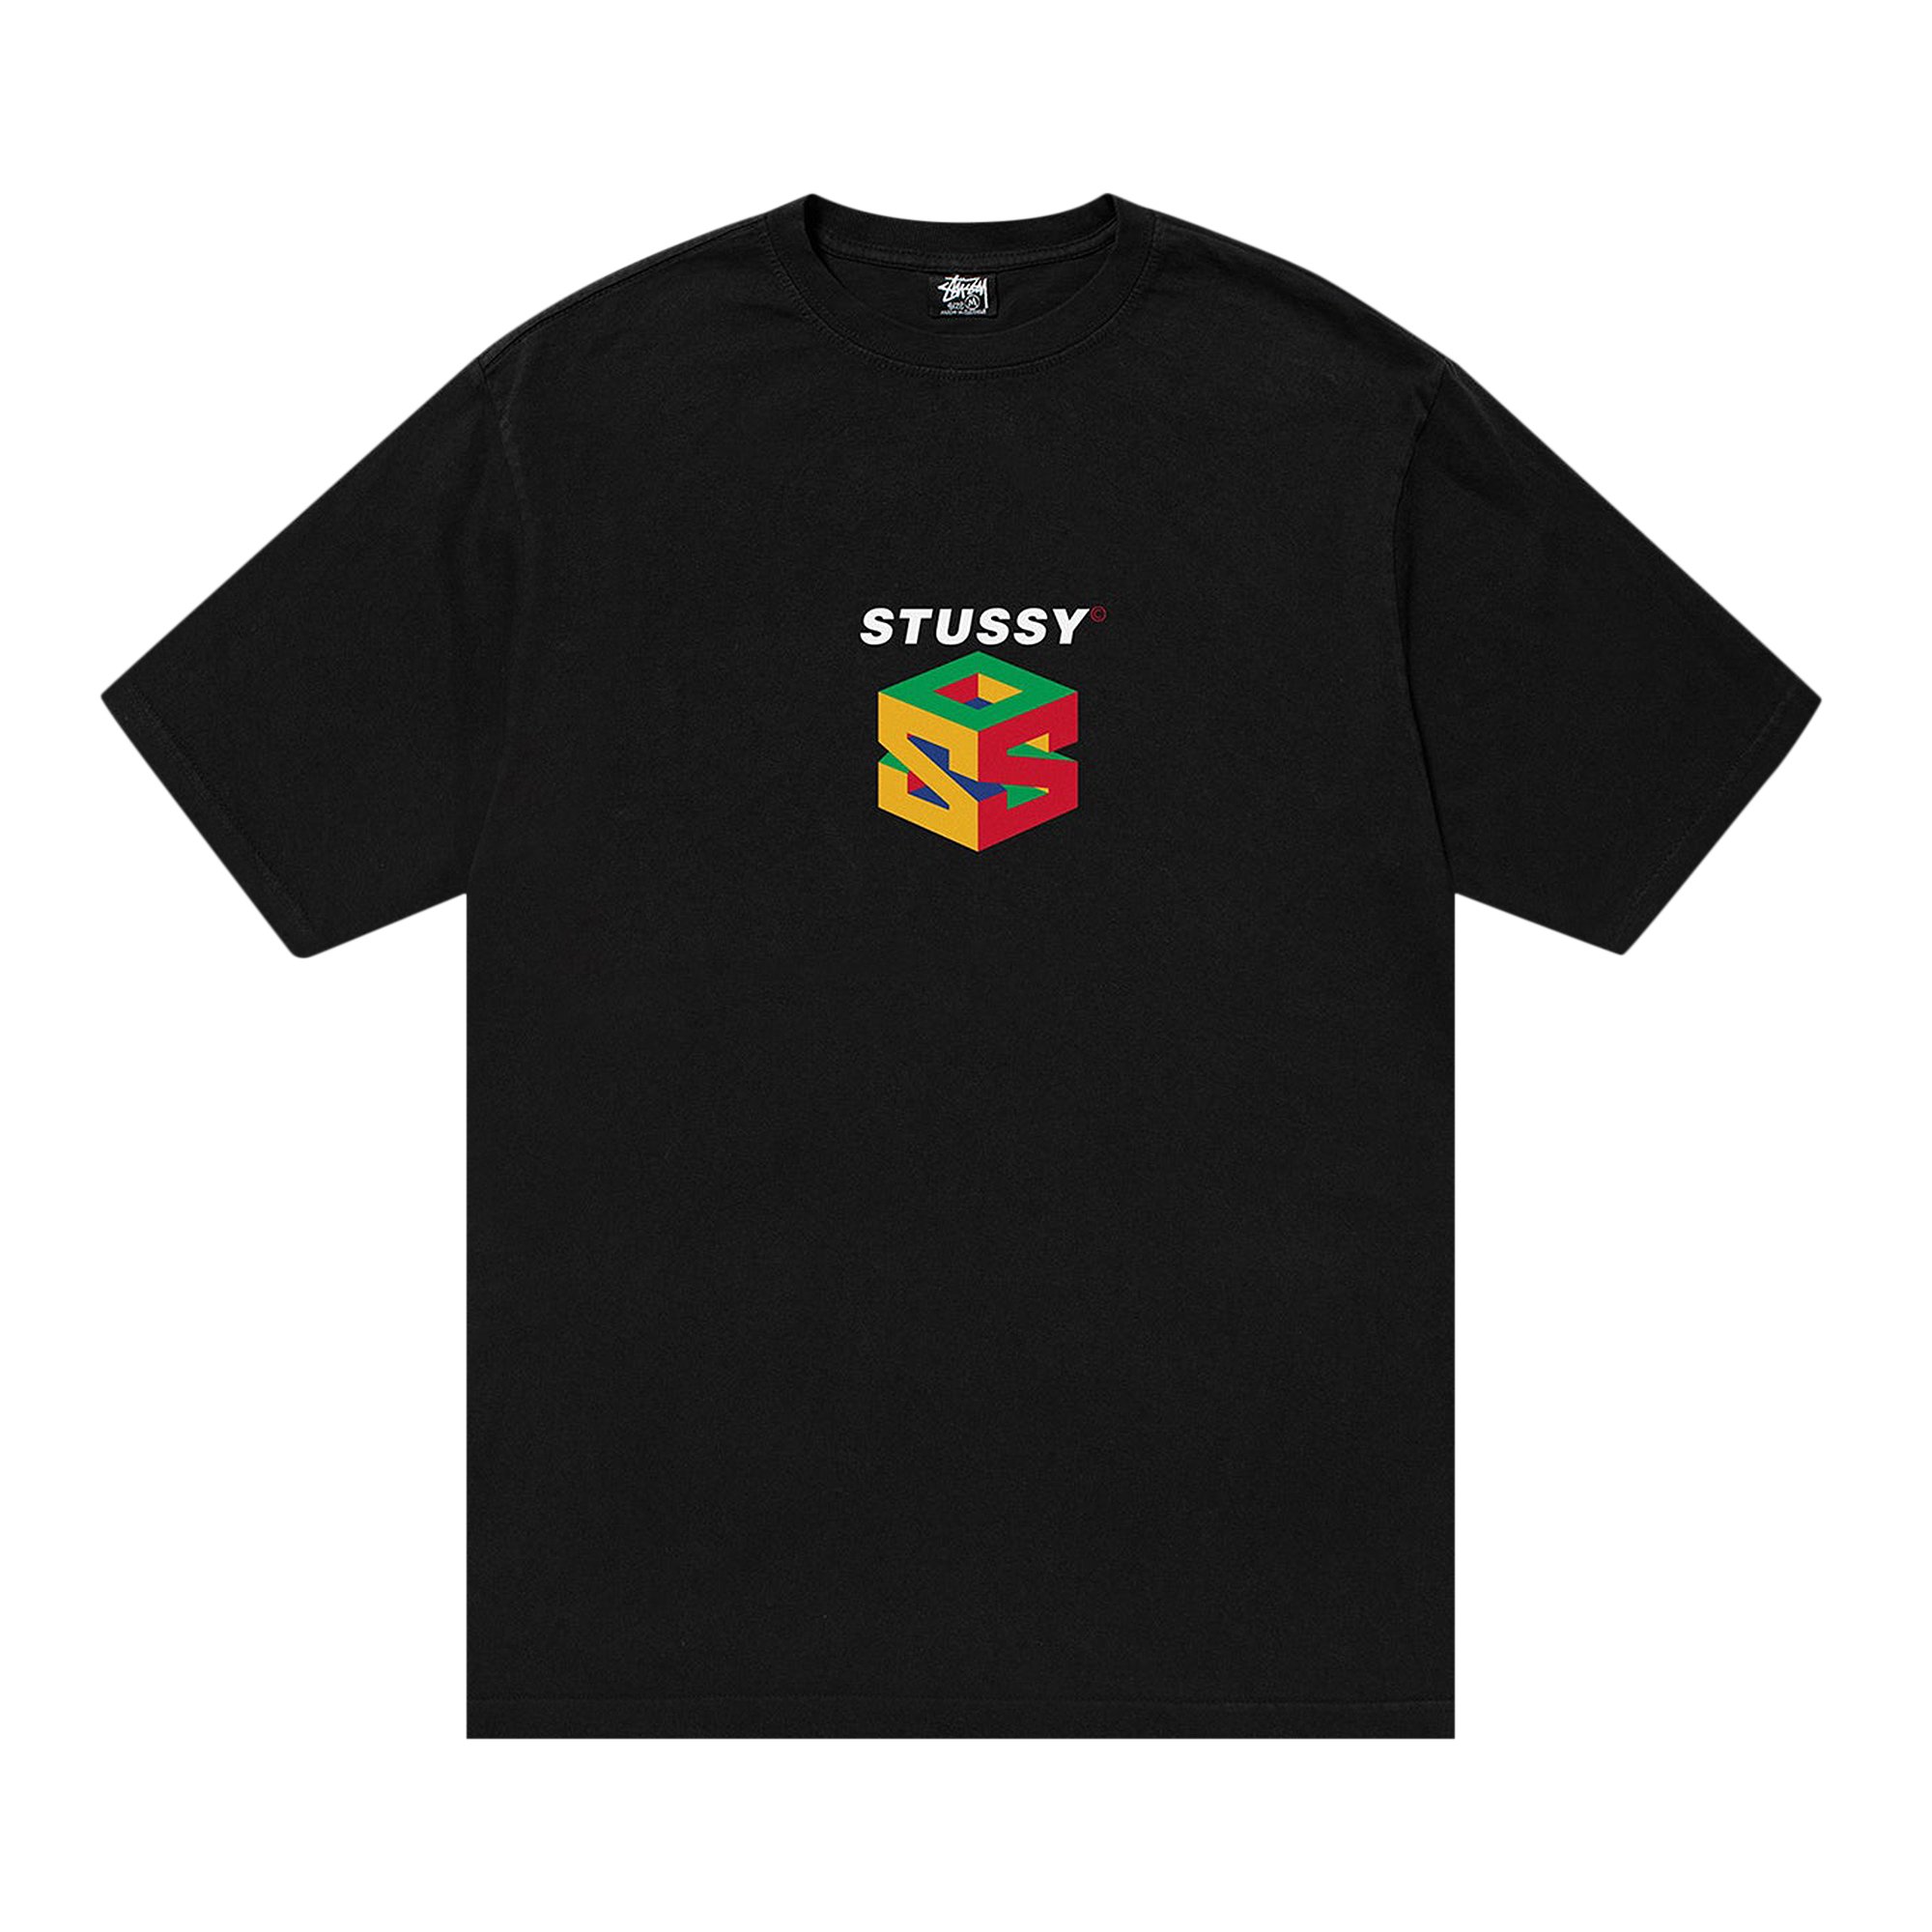 Buy Stussy S64 Pigment Dyed Tee 'Black' - 1904913 BLAC | GOAT IT